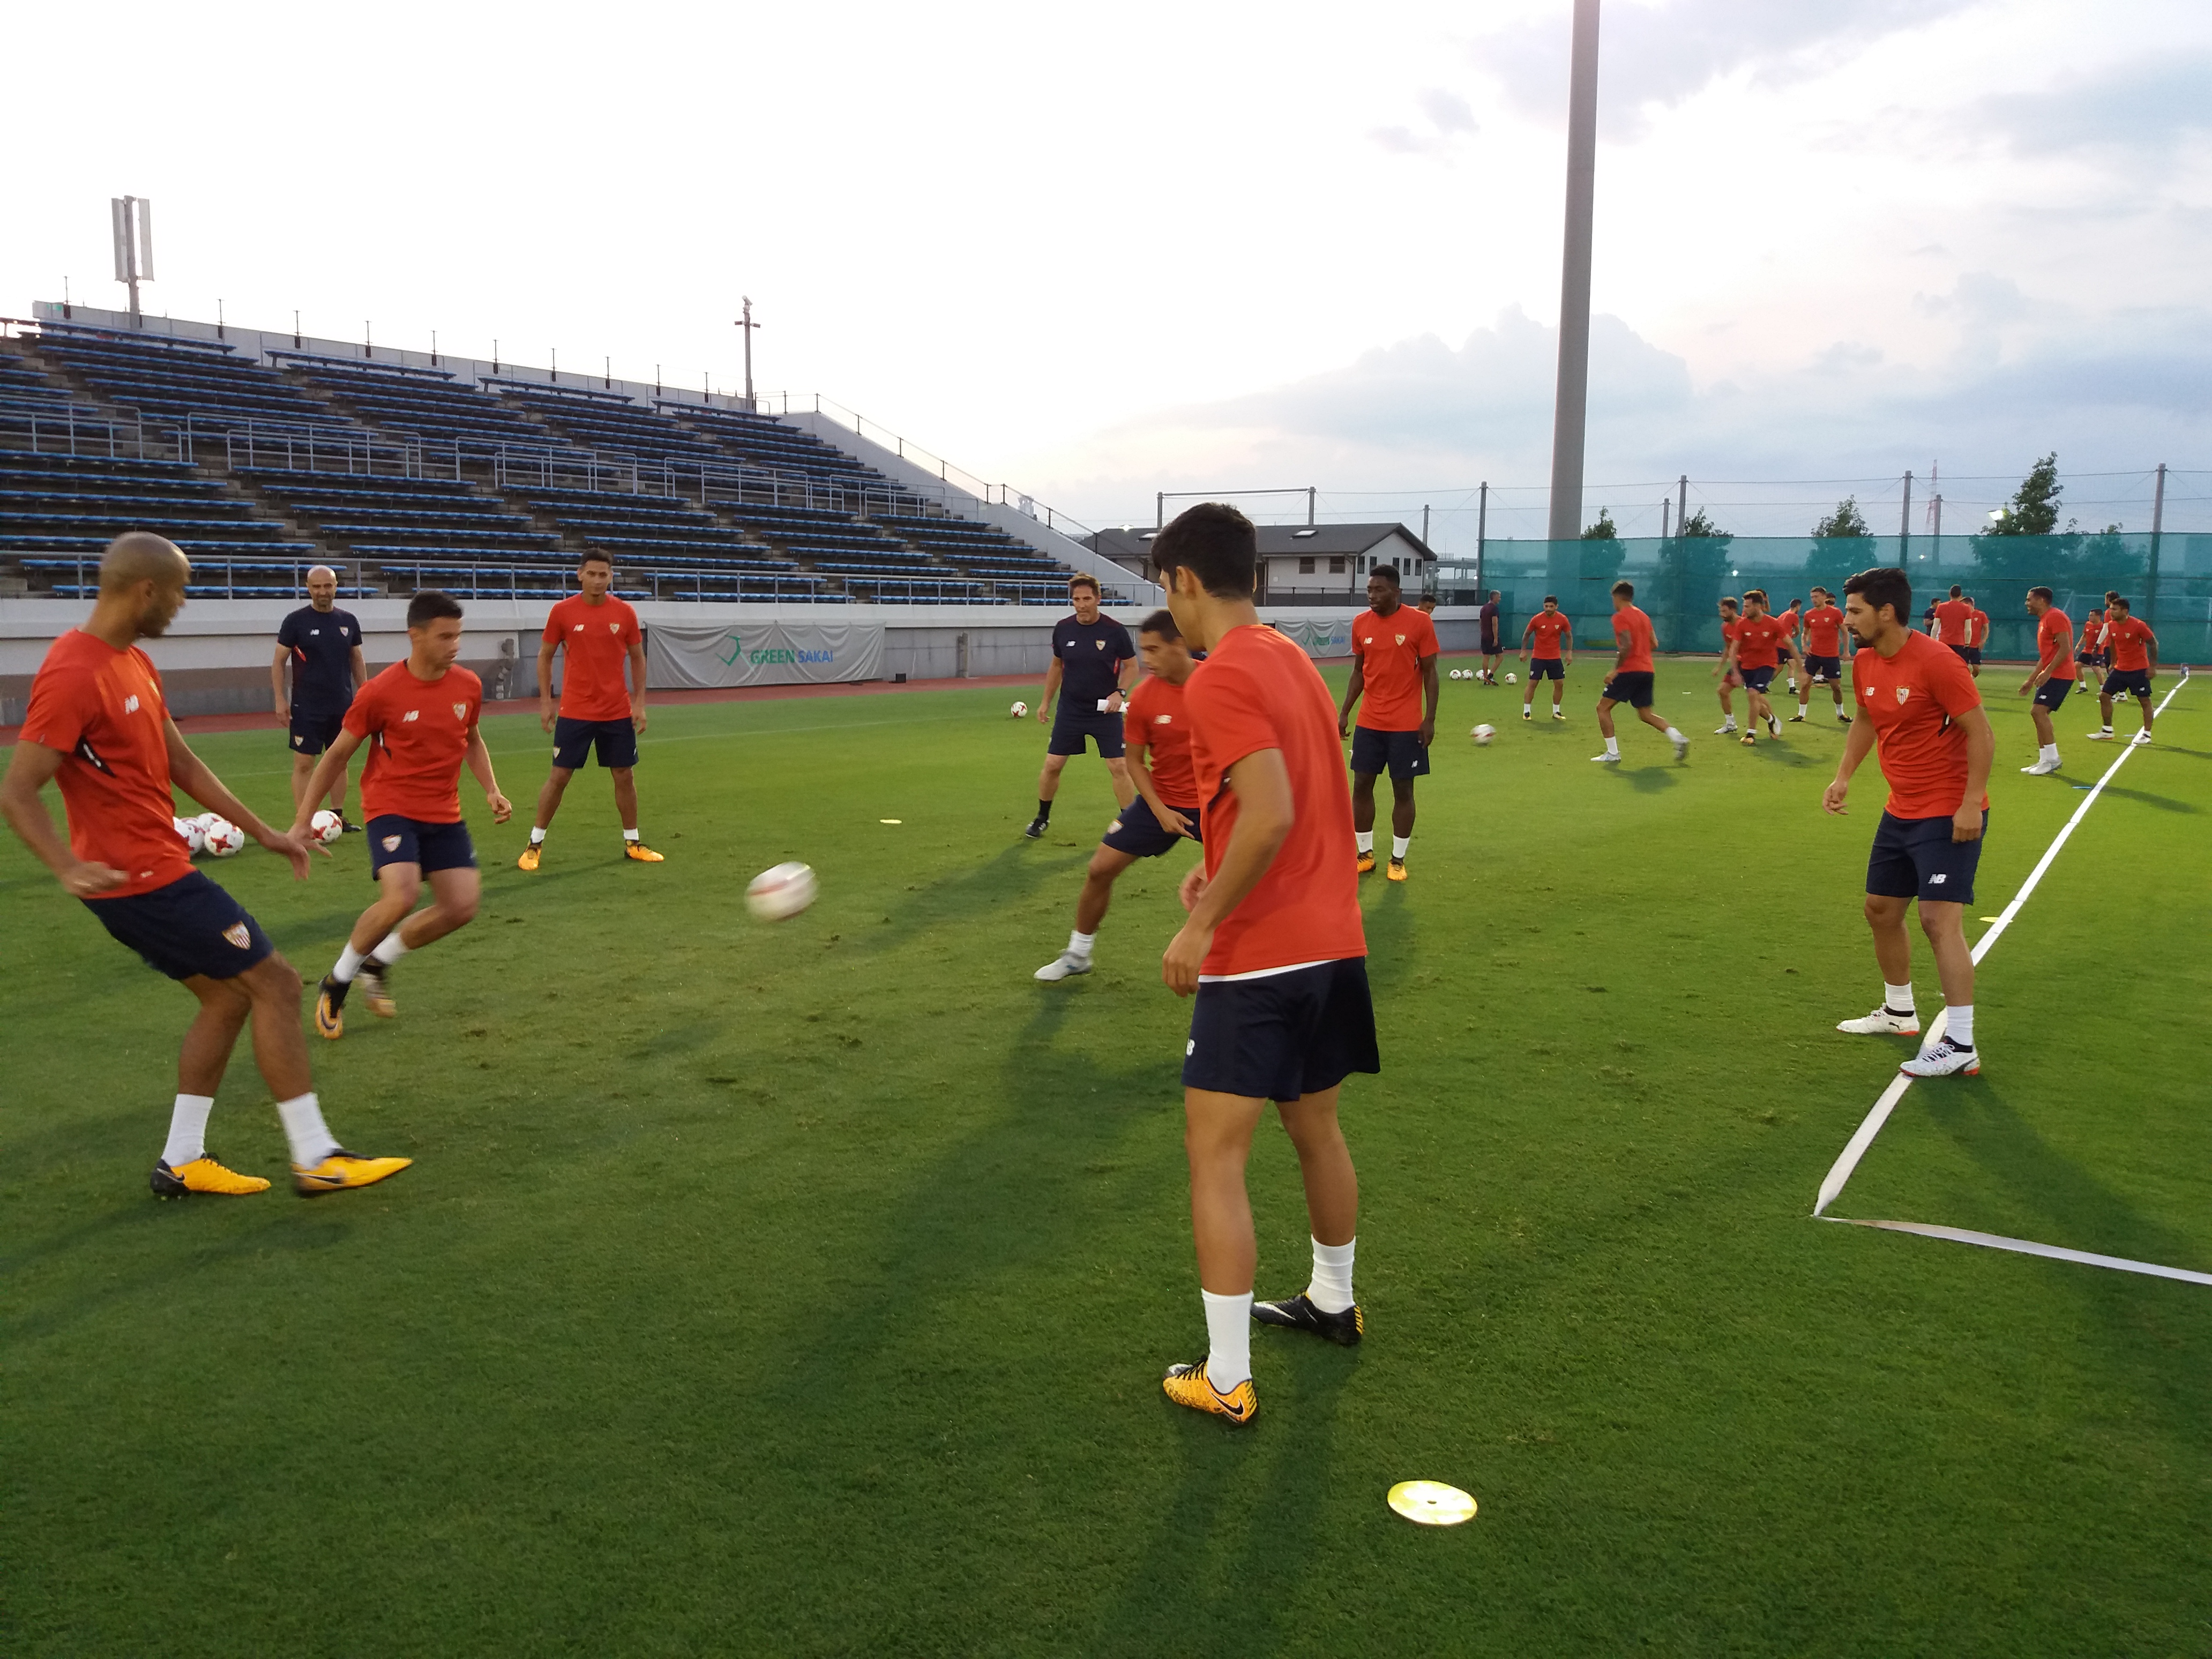 A Sevilla FC training session in Japan